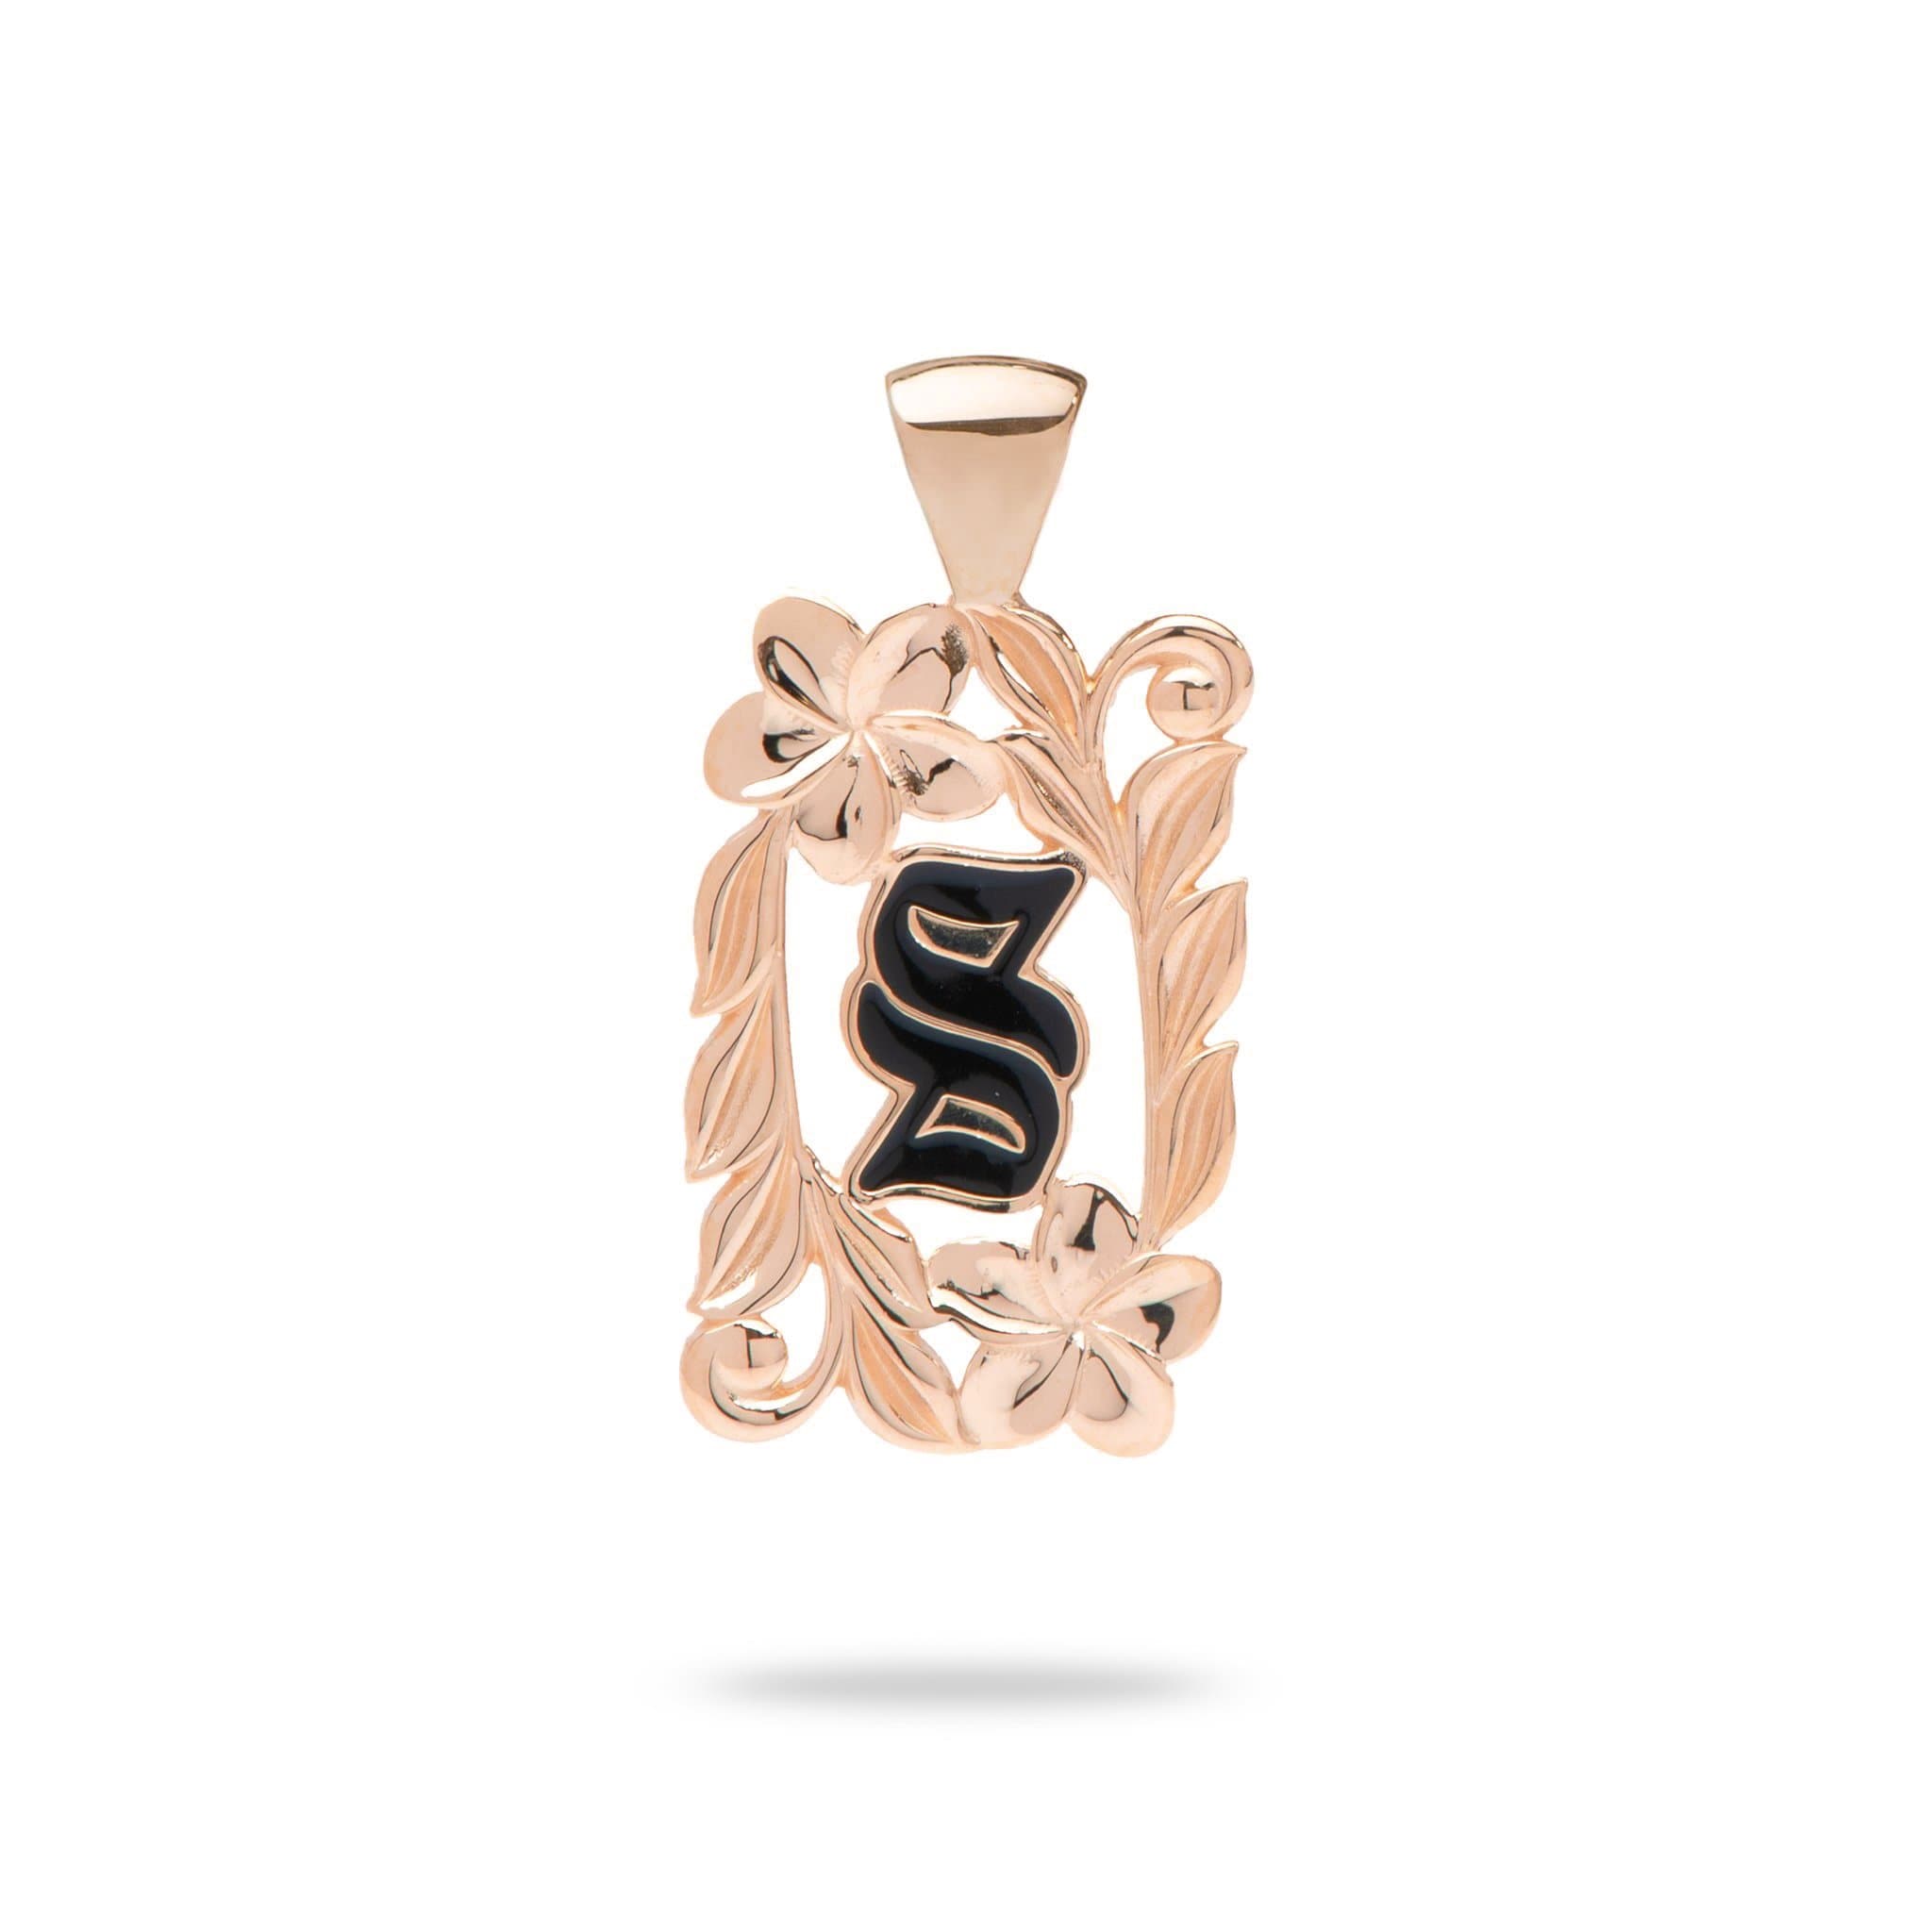 Special Order Hawaiian Heirloom Initial Pendant in Rose Gold - 014-03615-S-14R